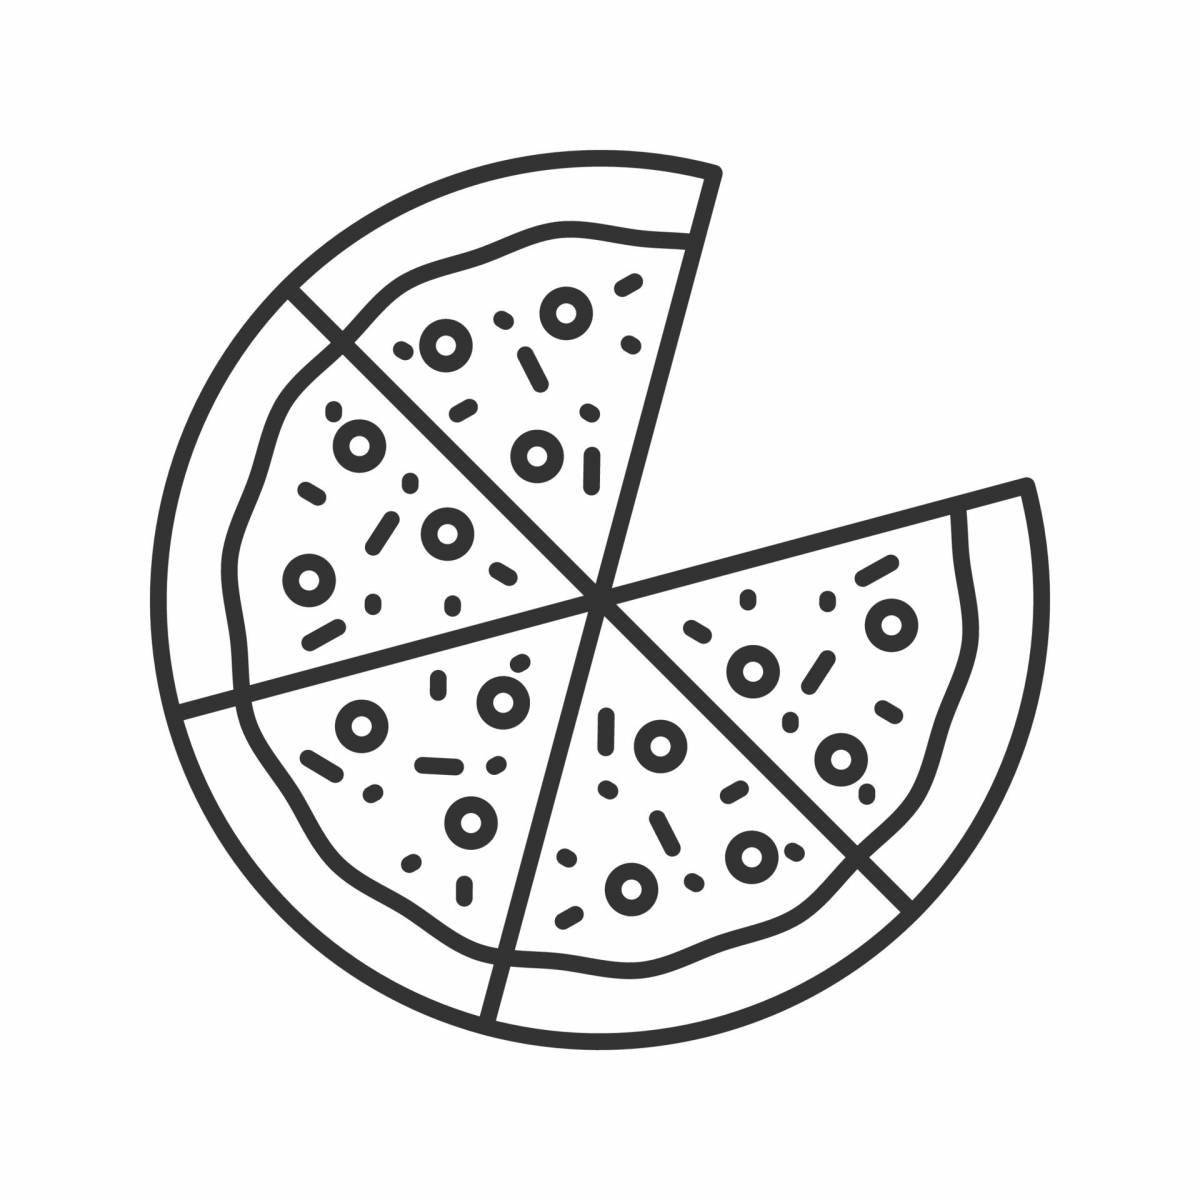 Tempting sausage pizza coloring page